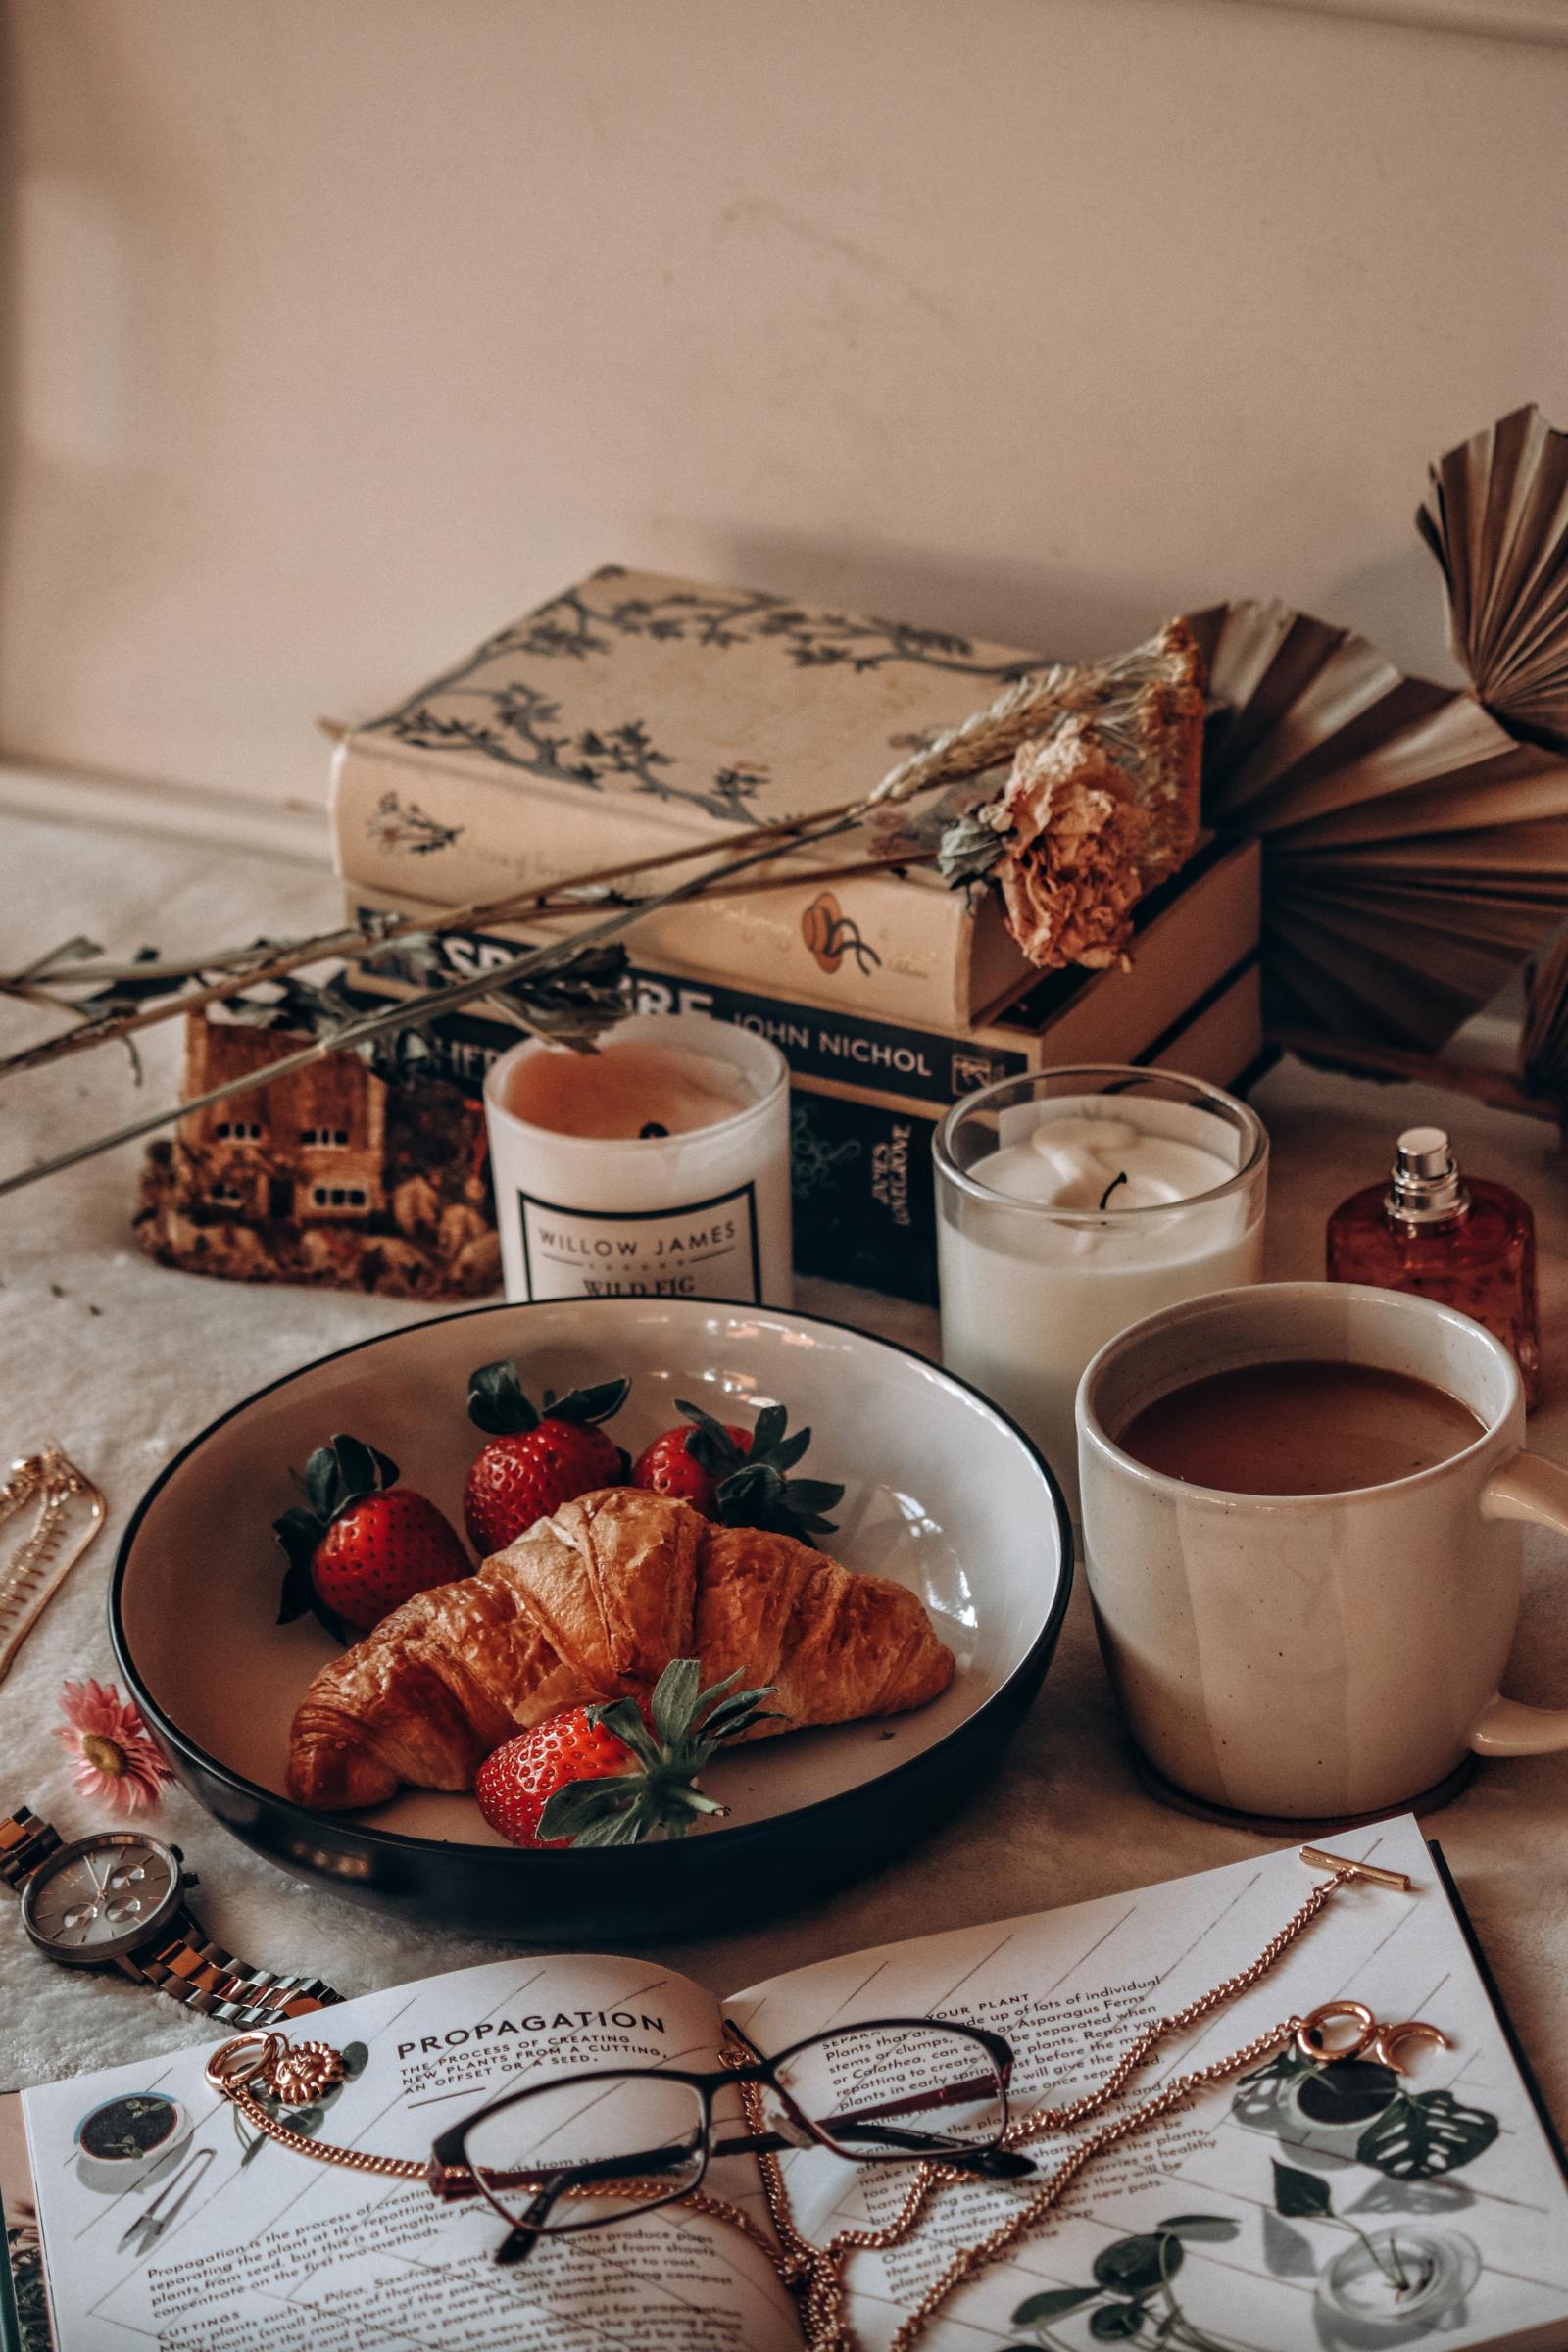 This images shows a breakfast set up with coffee and books